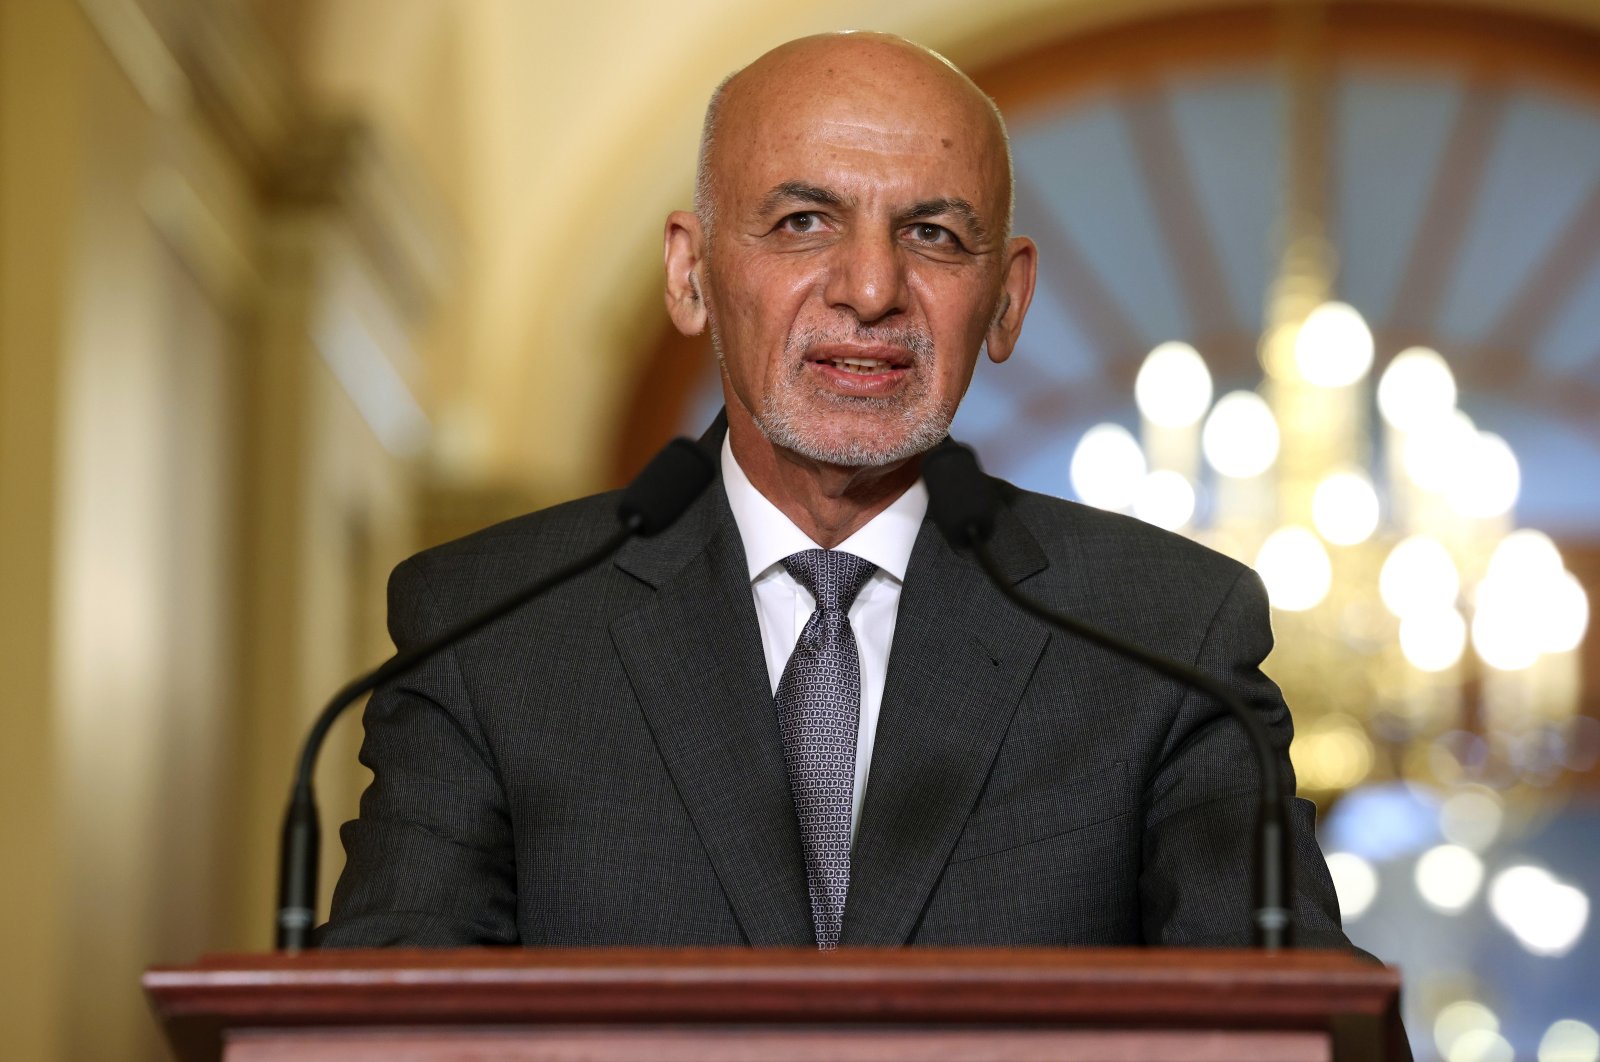 Former President of Afghanistan Ashraf Ghani speaks to reporters at the U.S. Capitol in Washington, D.C., June 25, 2021. (Getty Images)